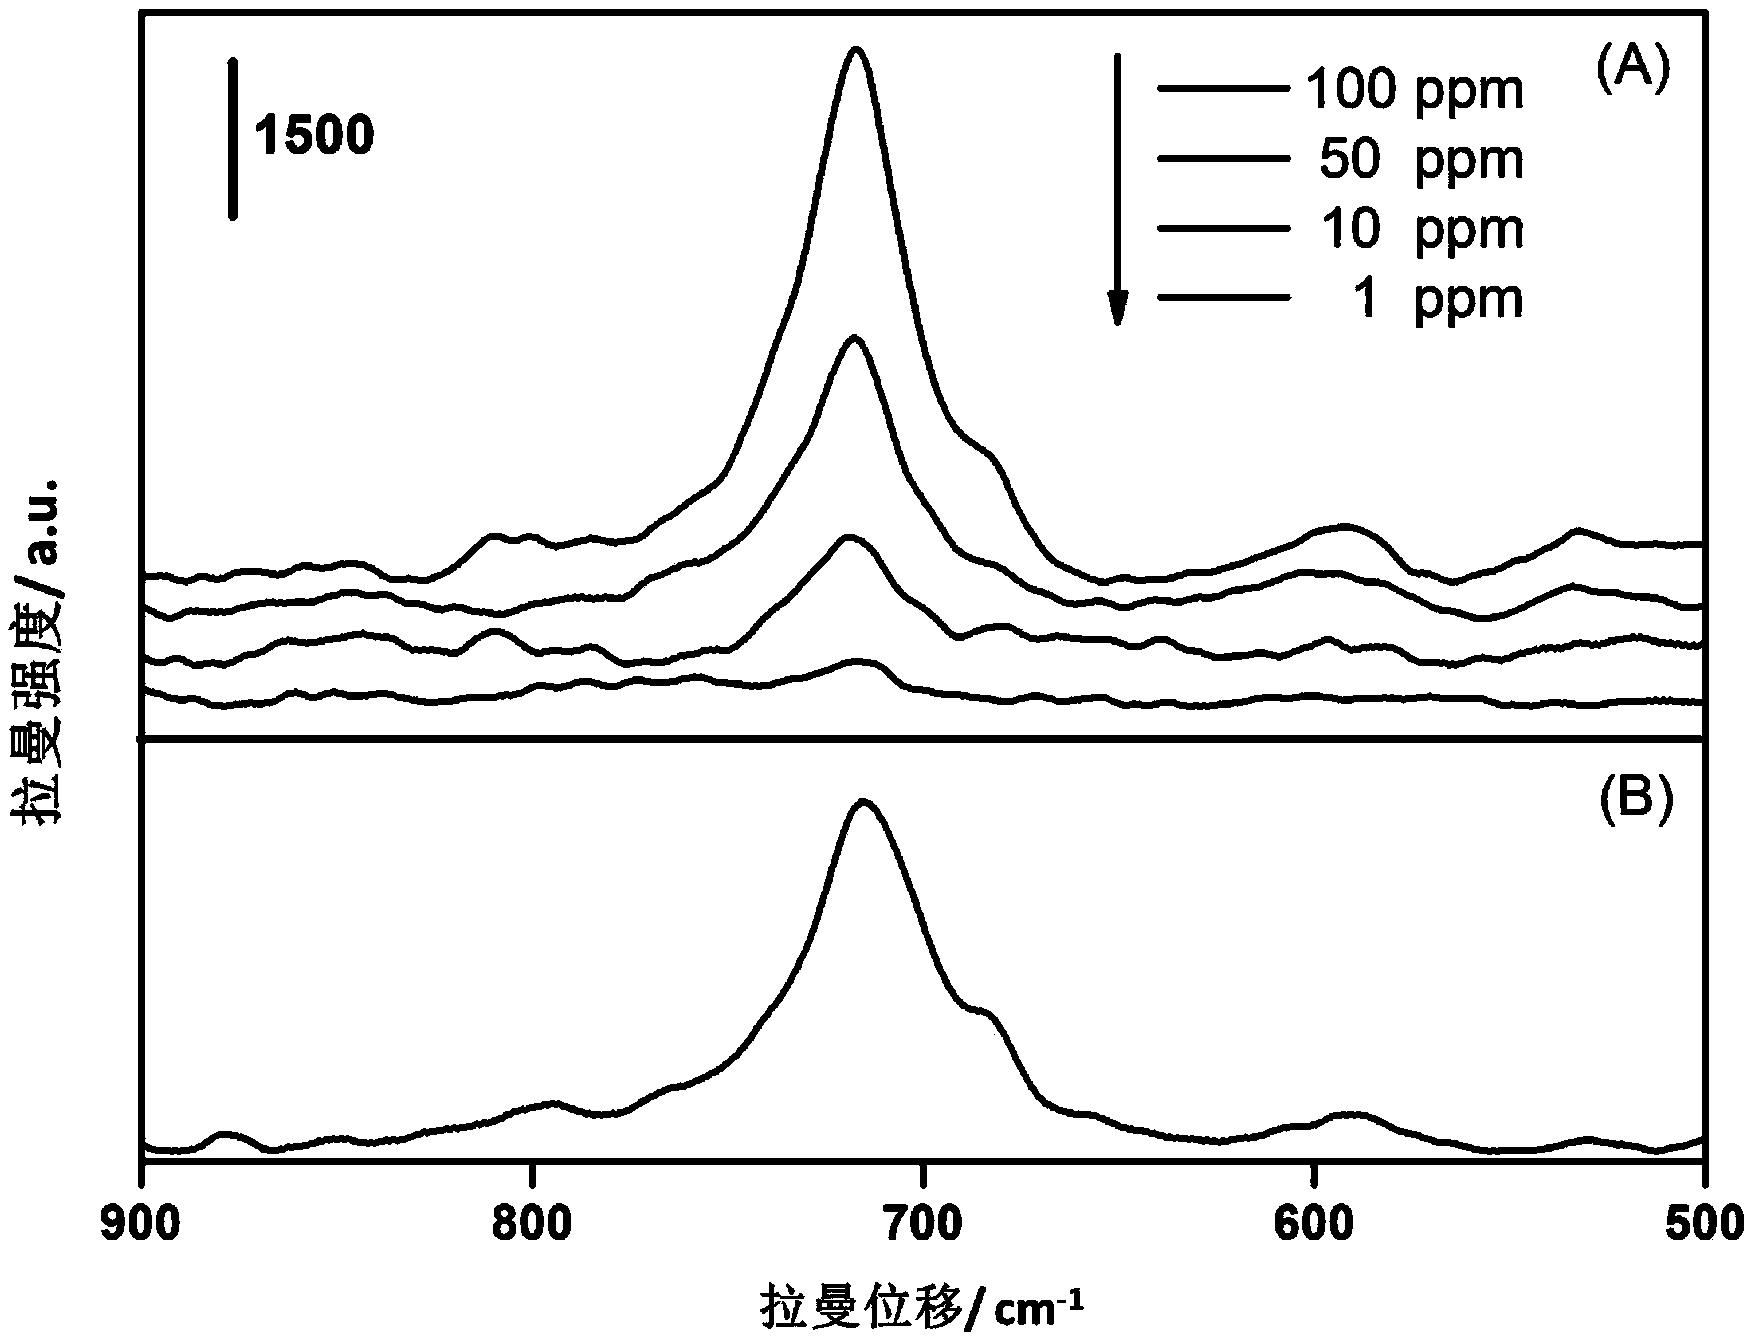 Method for detecting tripolycyanamide in milk based on surface-enhanced Raman activity chip